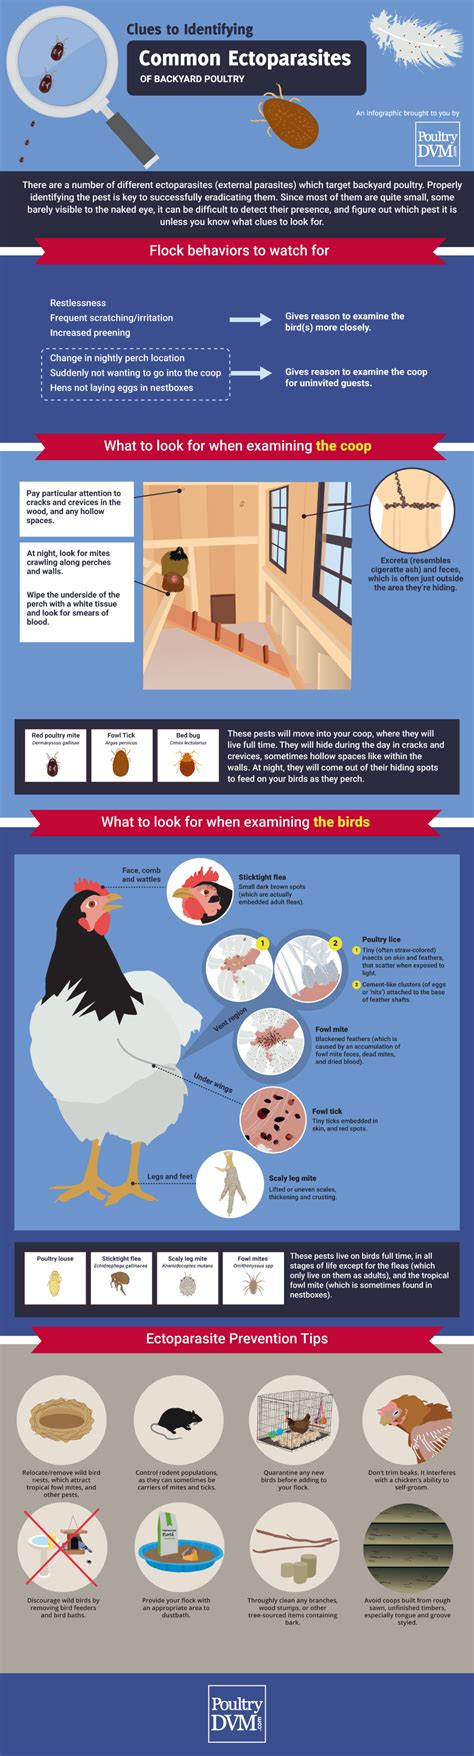 poultrydvm clues to identifying common ectoparasites in backyard poultry backyard poultry